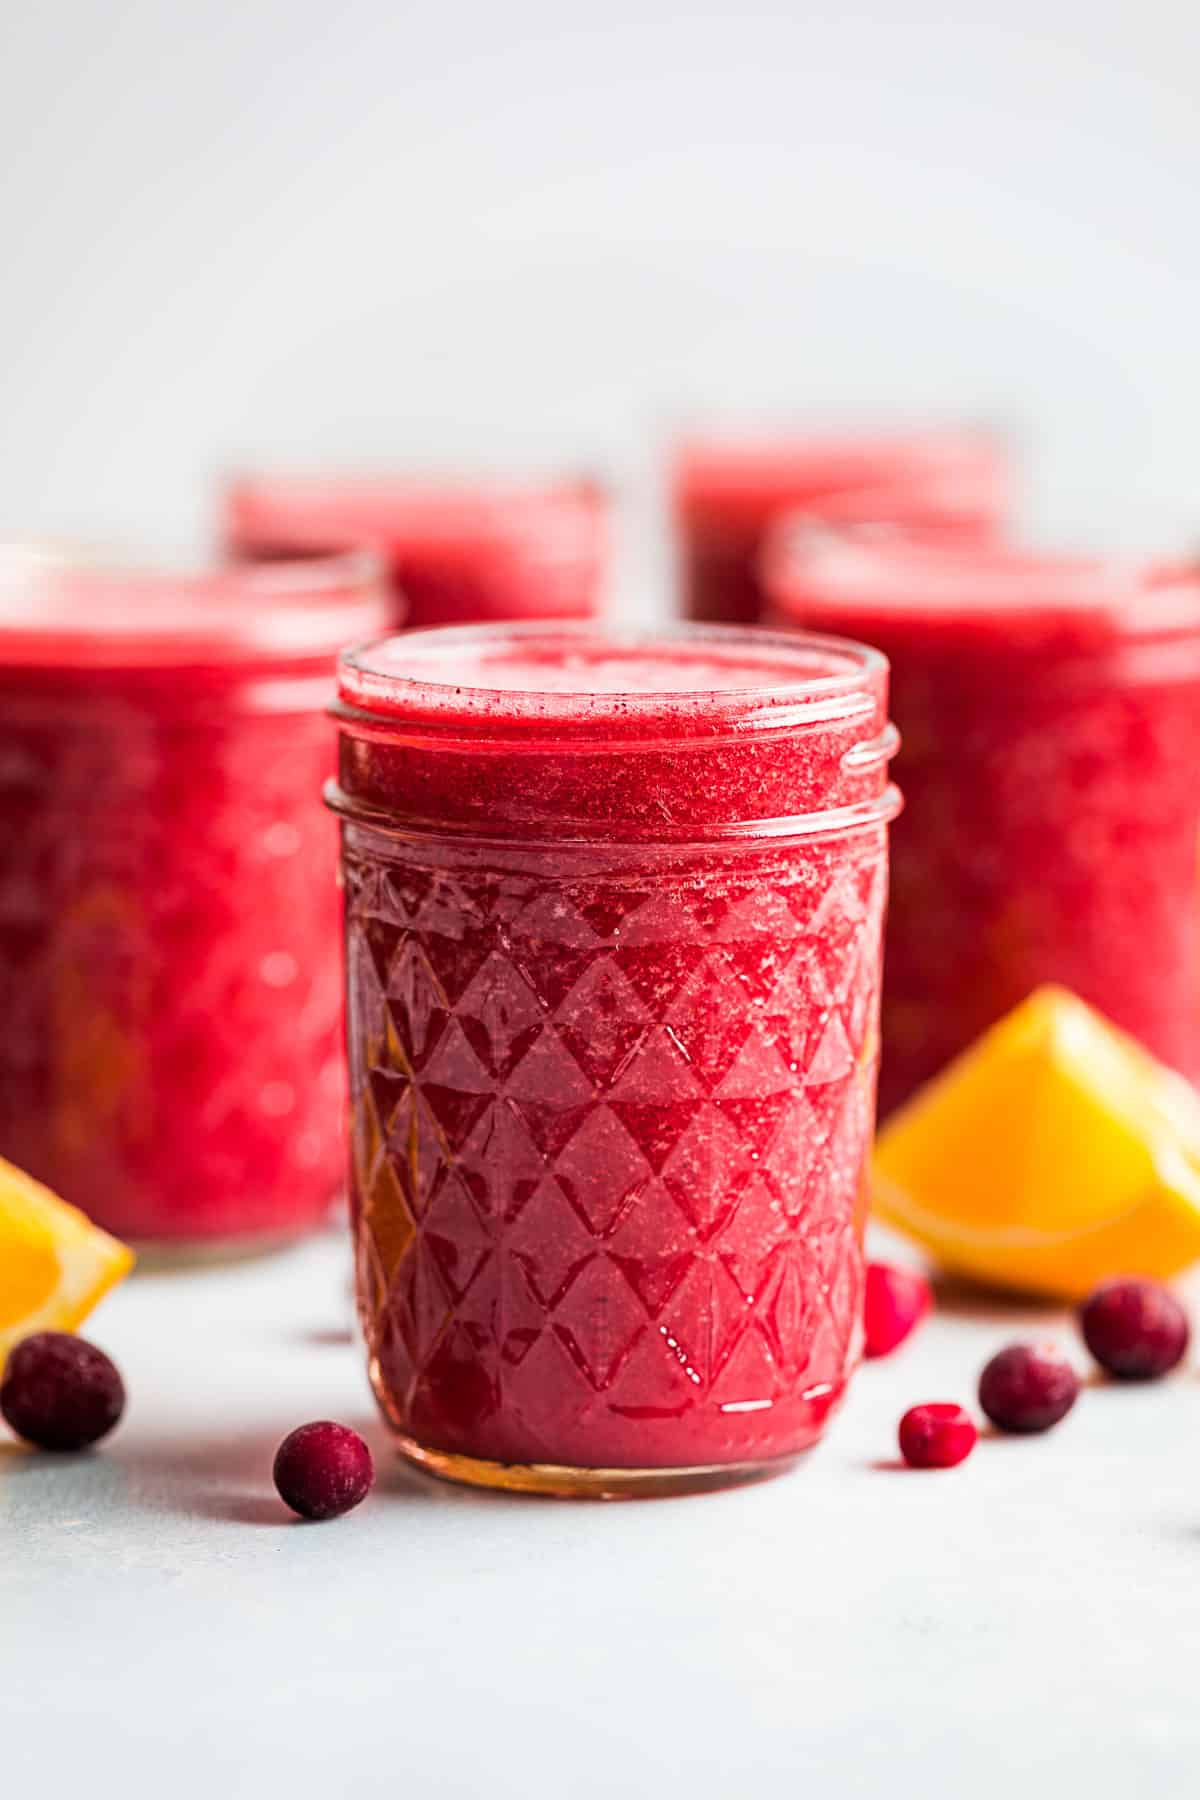 5 glasses full of Cranberry Orange Smoothie with frozen cranberries and orange wedges place around them.